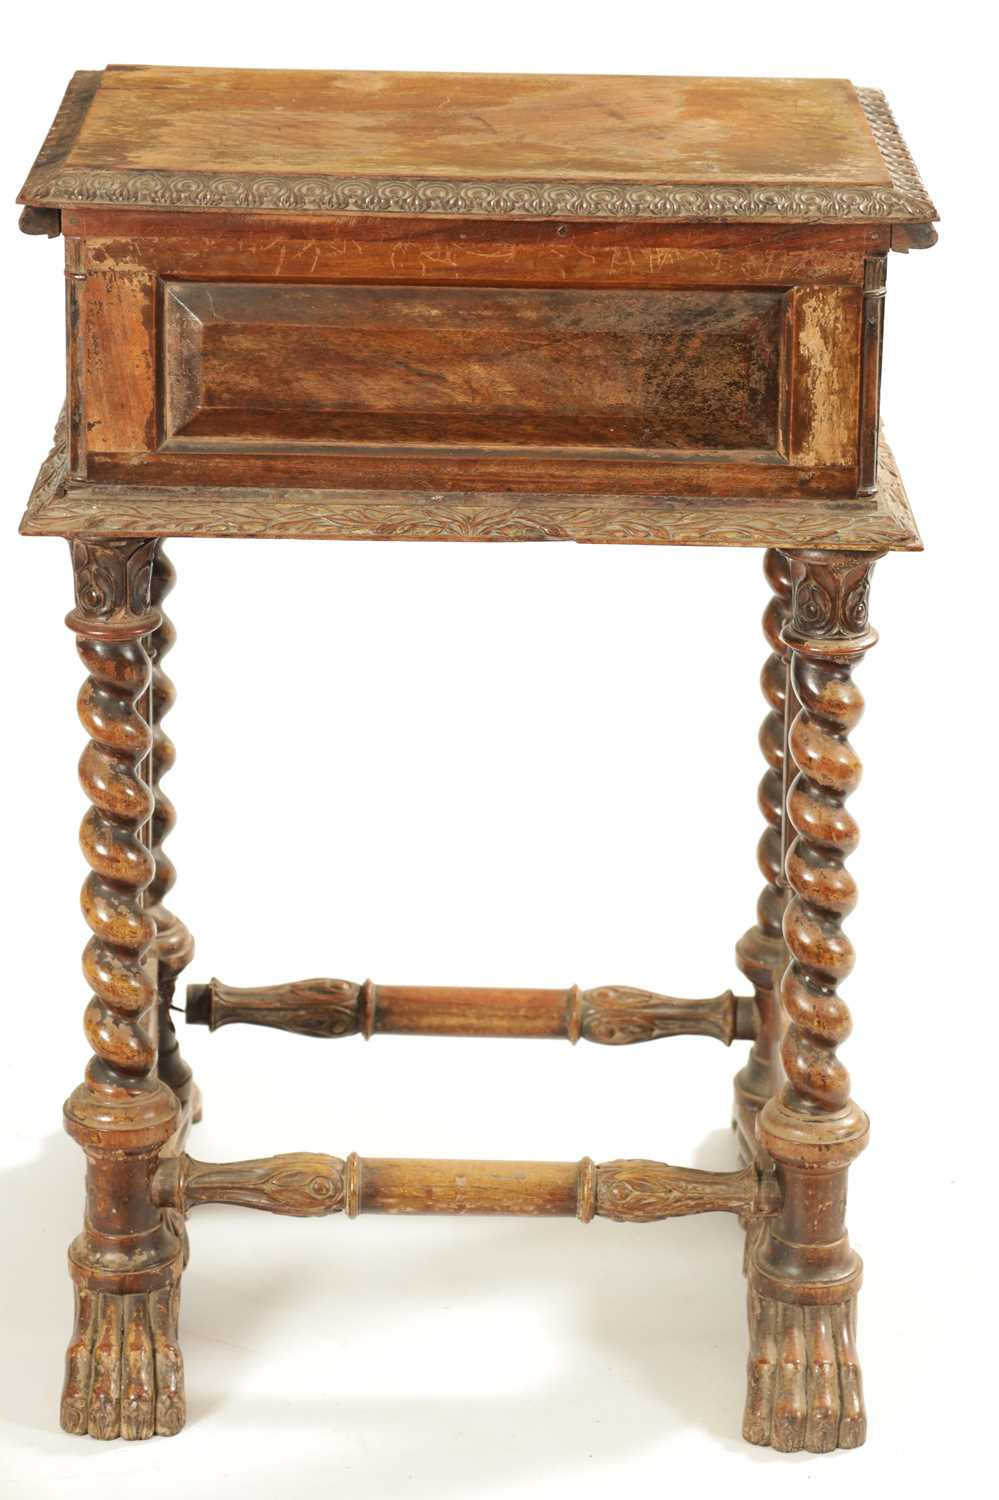 A WILLIAM IV COLONIAL INDIAN PADOUK WOOD WORK TABLE - Image 10 of 10